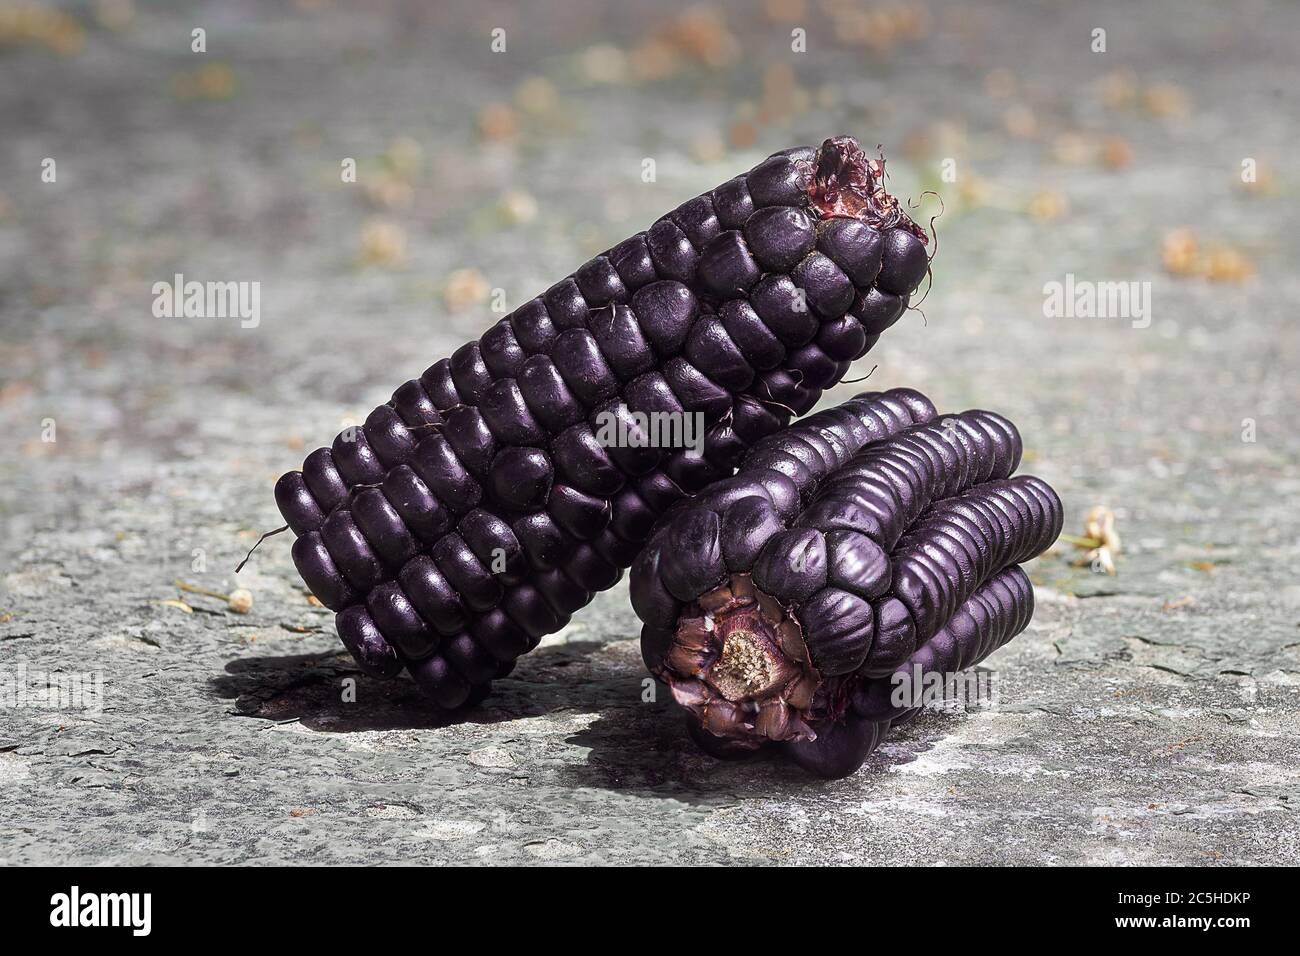 details of a peruvian purple corn, zea mays l, over a stone table on a sunny day Stock Photo